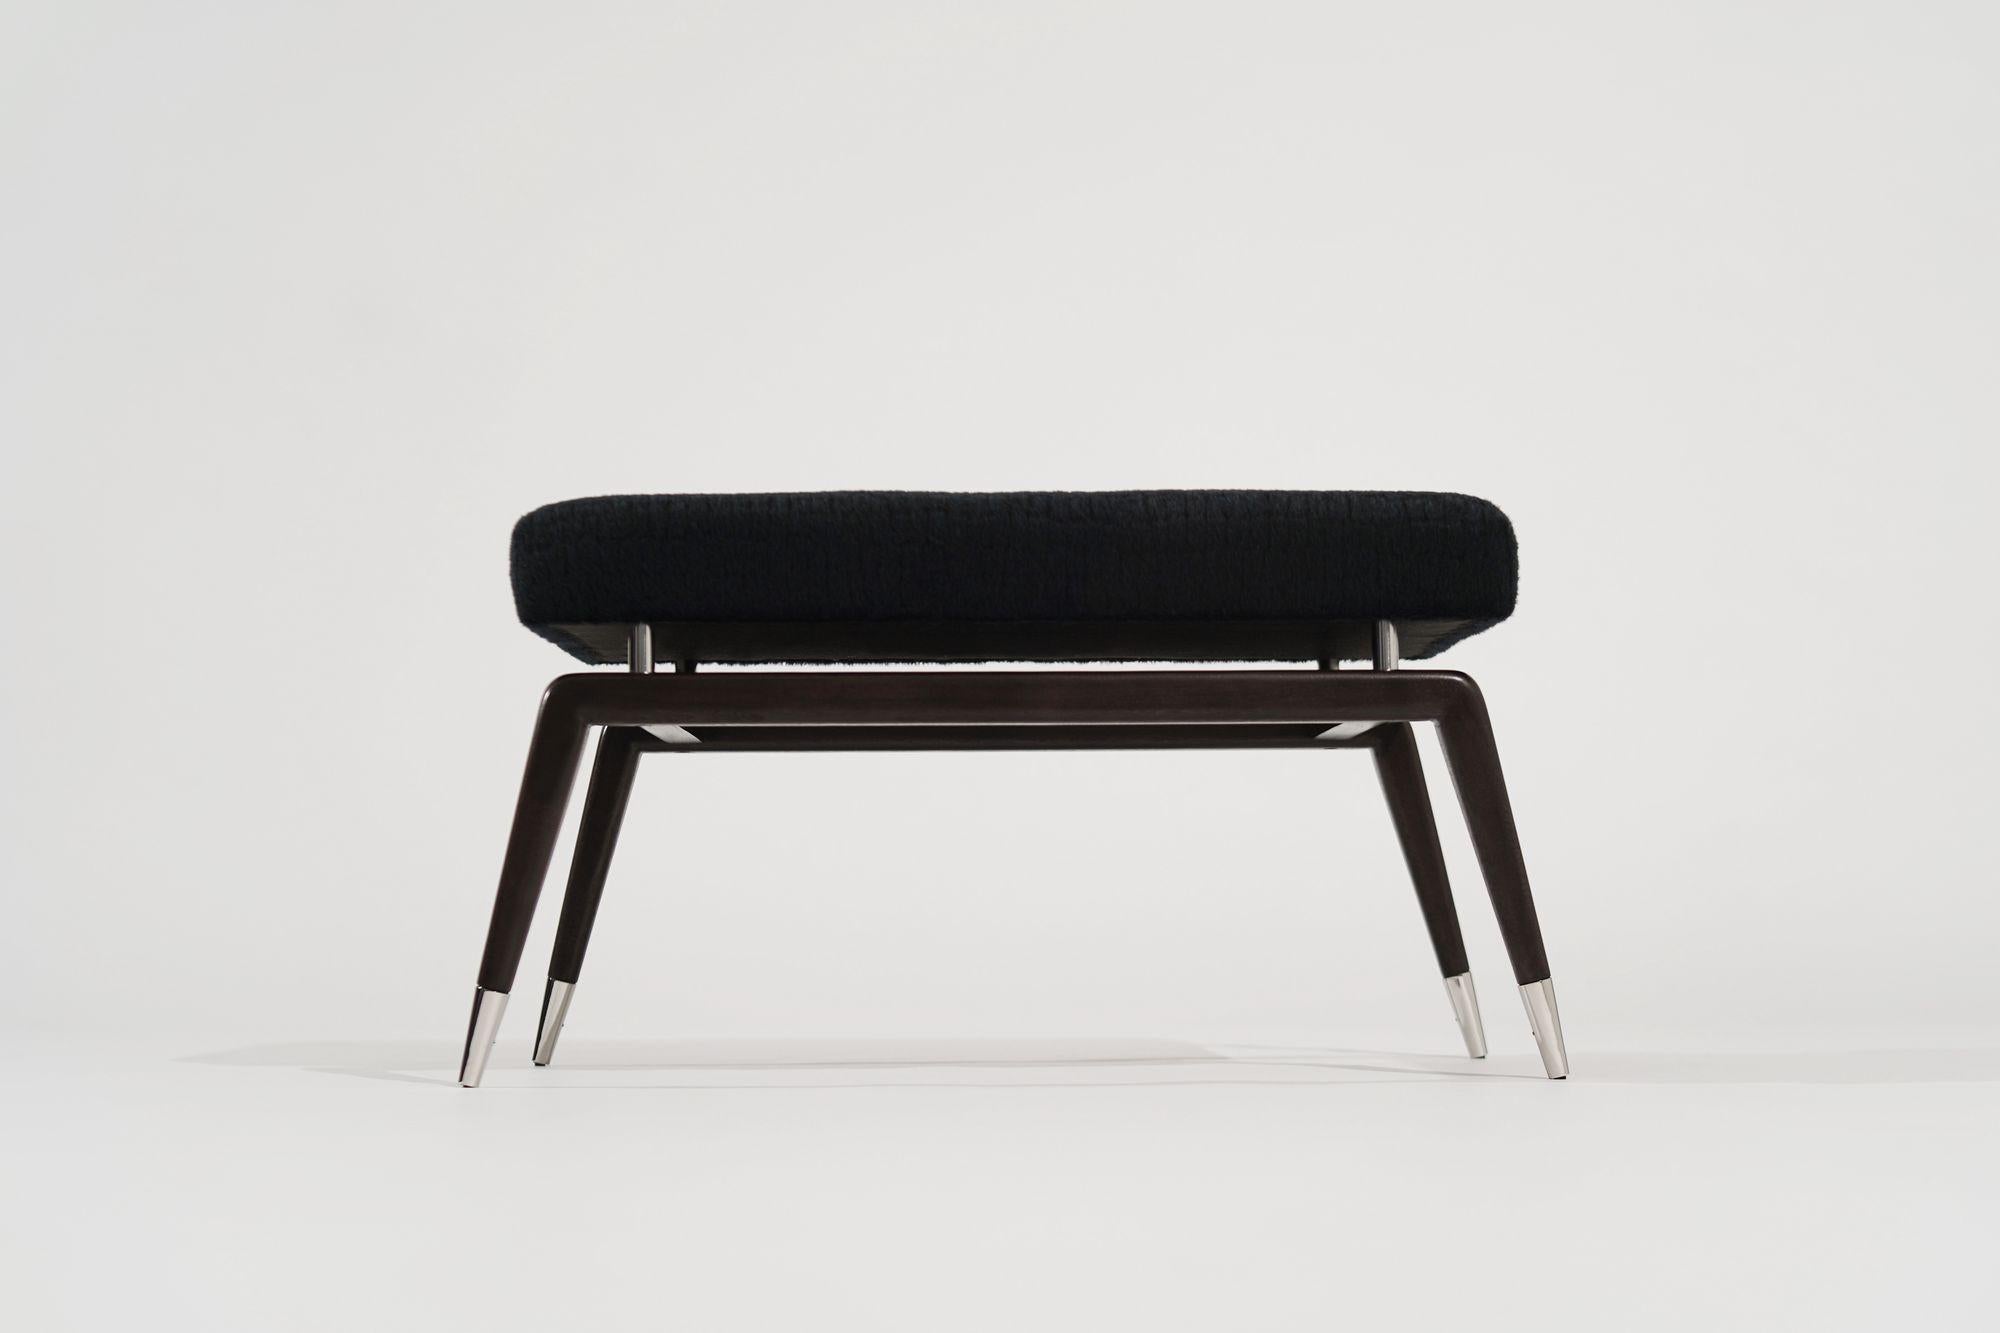 Introducing The Gio Bench, a masterpiece inspired by the renowned Italian designer Gio Ponti, meticulously crafted by Stamford Modern. This exceptional bench pays homage to Ponti's iconic design principles, while offering a touch of contemporary